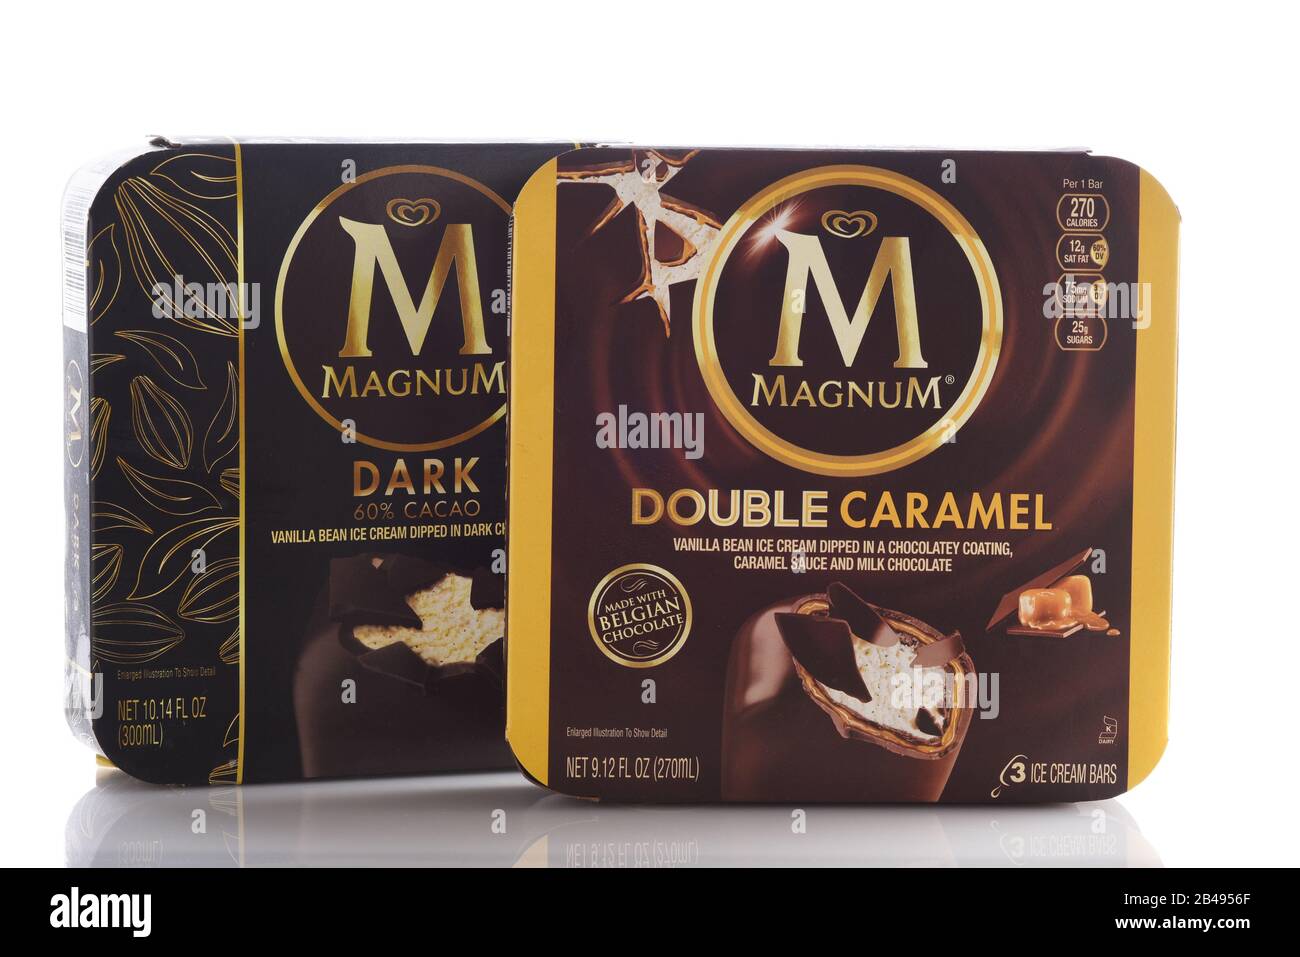 IRVINE, CALIFORNIA - MAY 6, 2019: Two boxes of Magnum Dark Chocolate and Double Caramel Ice Cream Bars. Launched in Sweden in 1989 as an upscale ice c Stock Photo